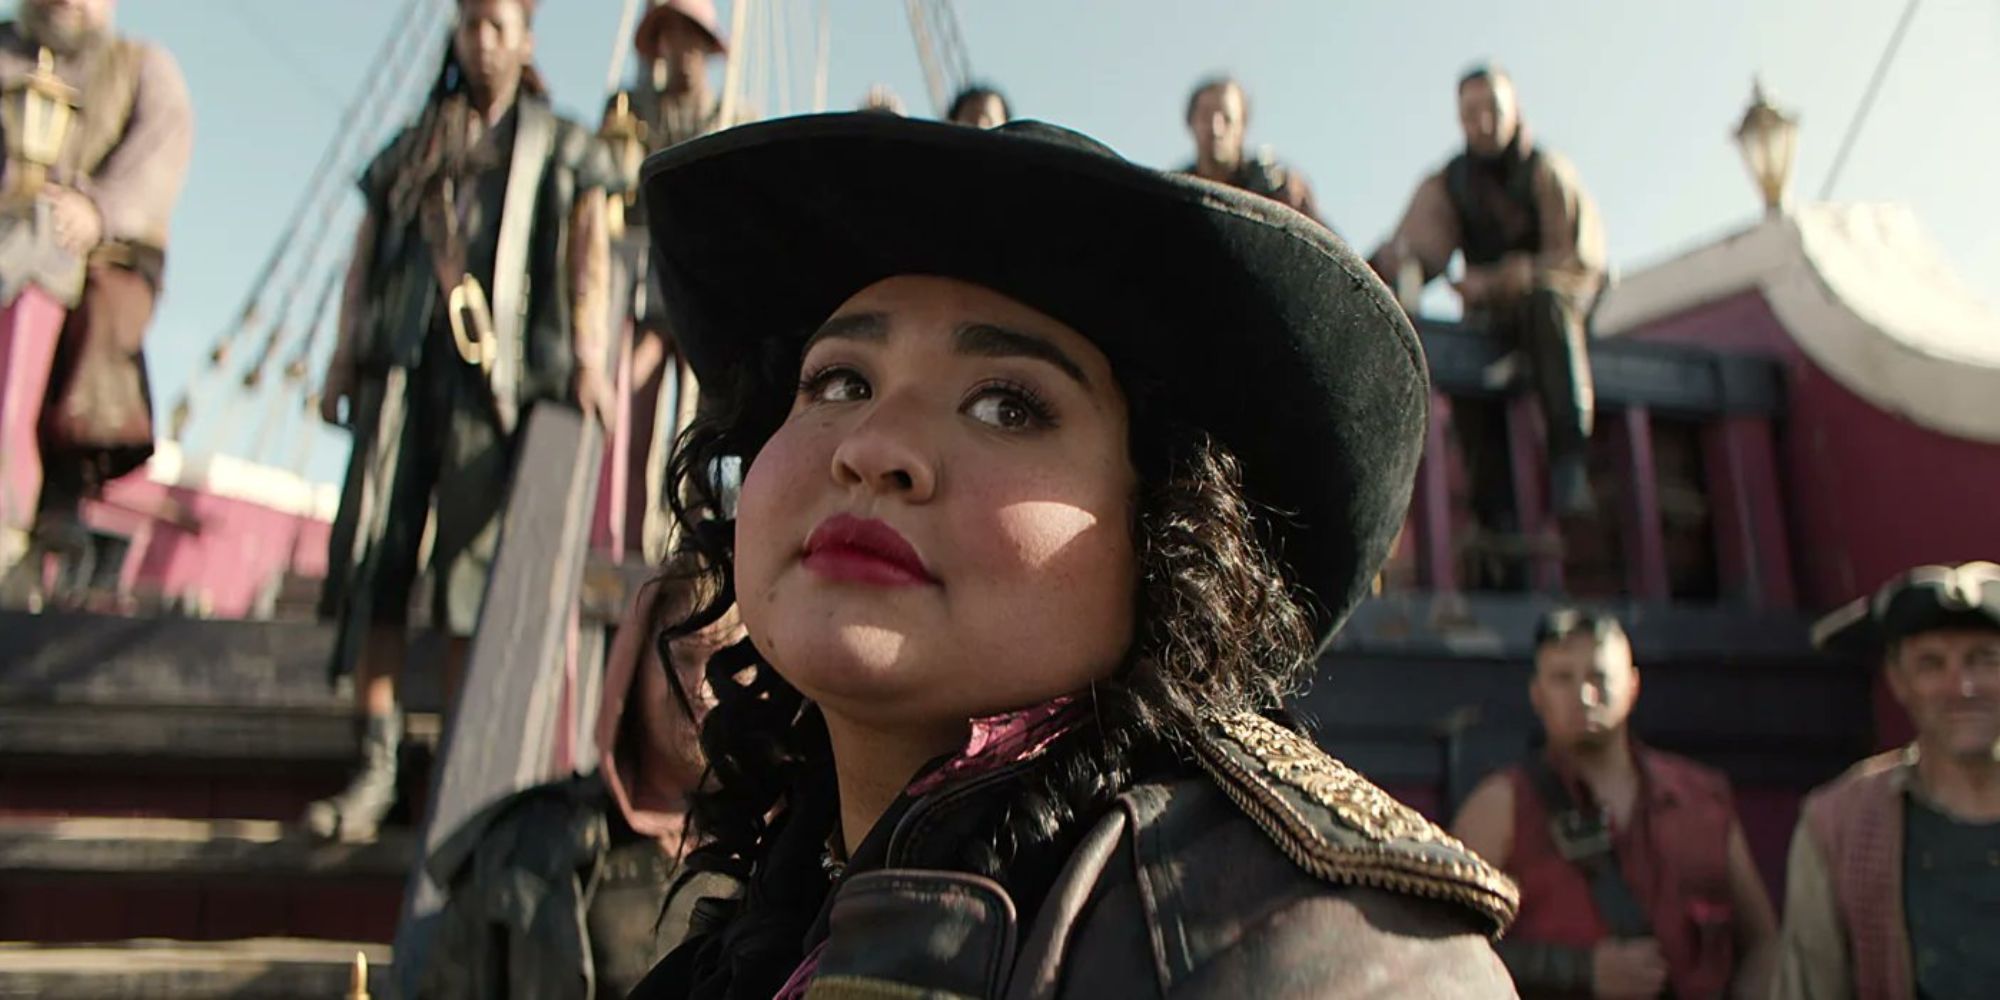 Alvida from One Piece on Netflix commands attention from her pirate crew in the live-action One Piece adaptation.